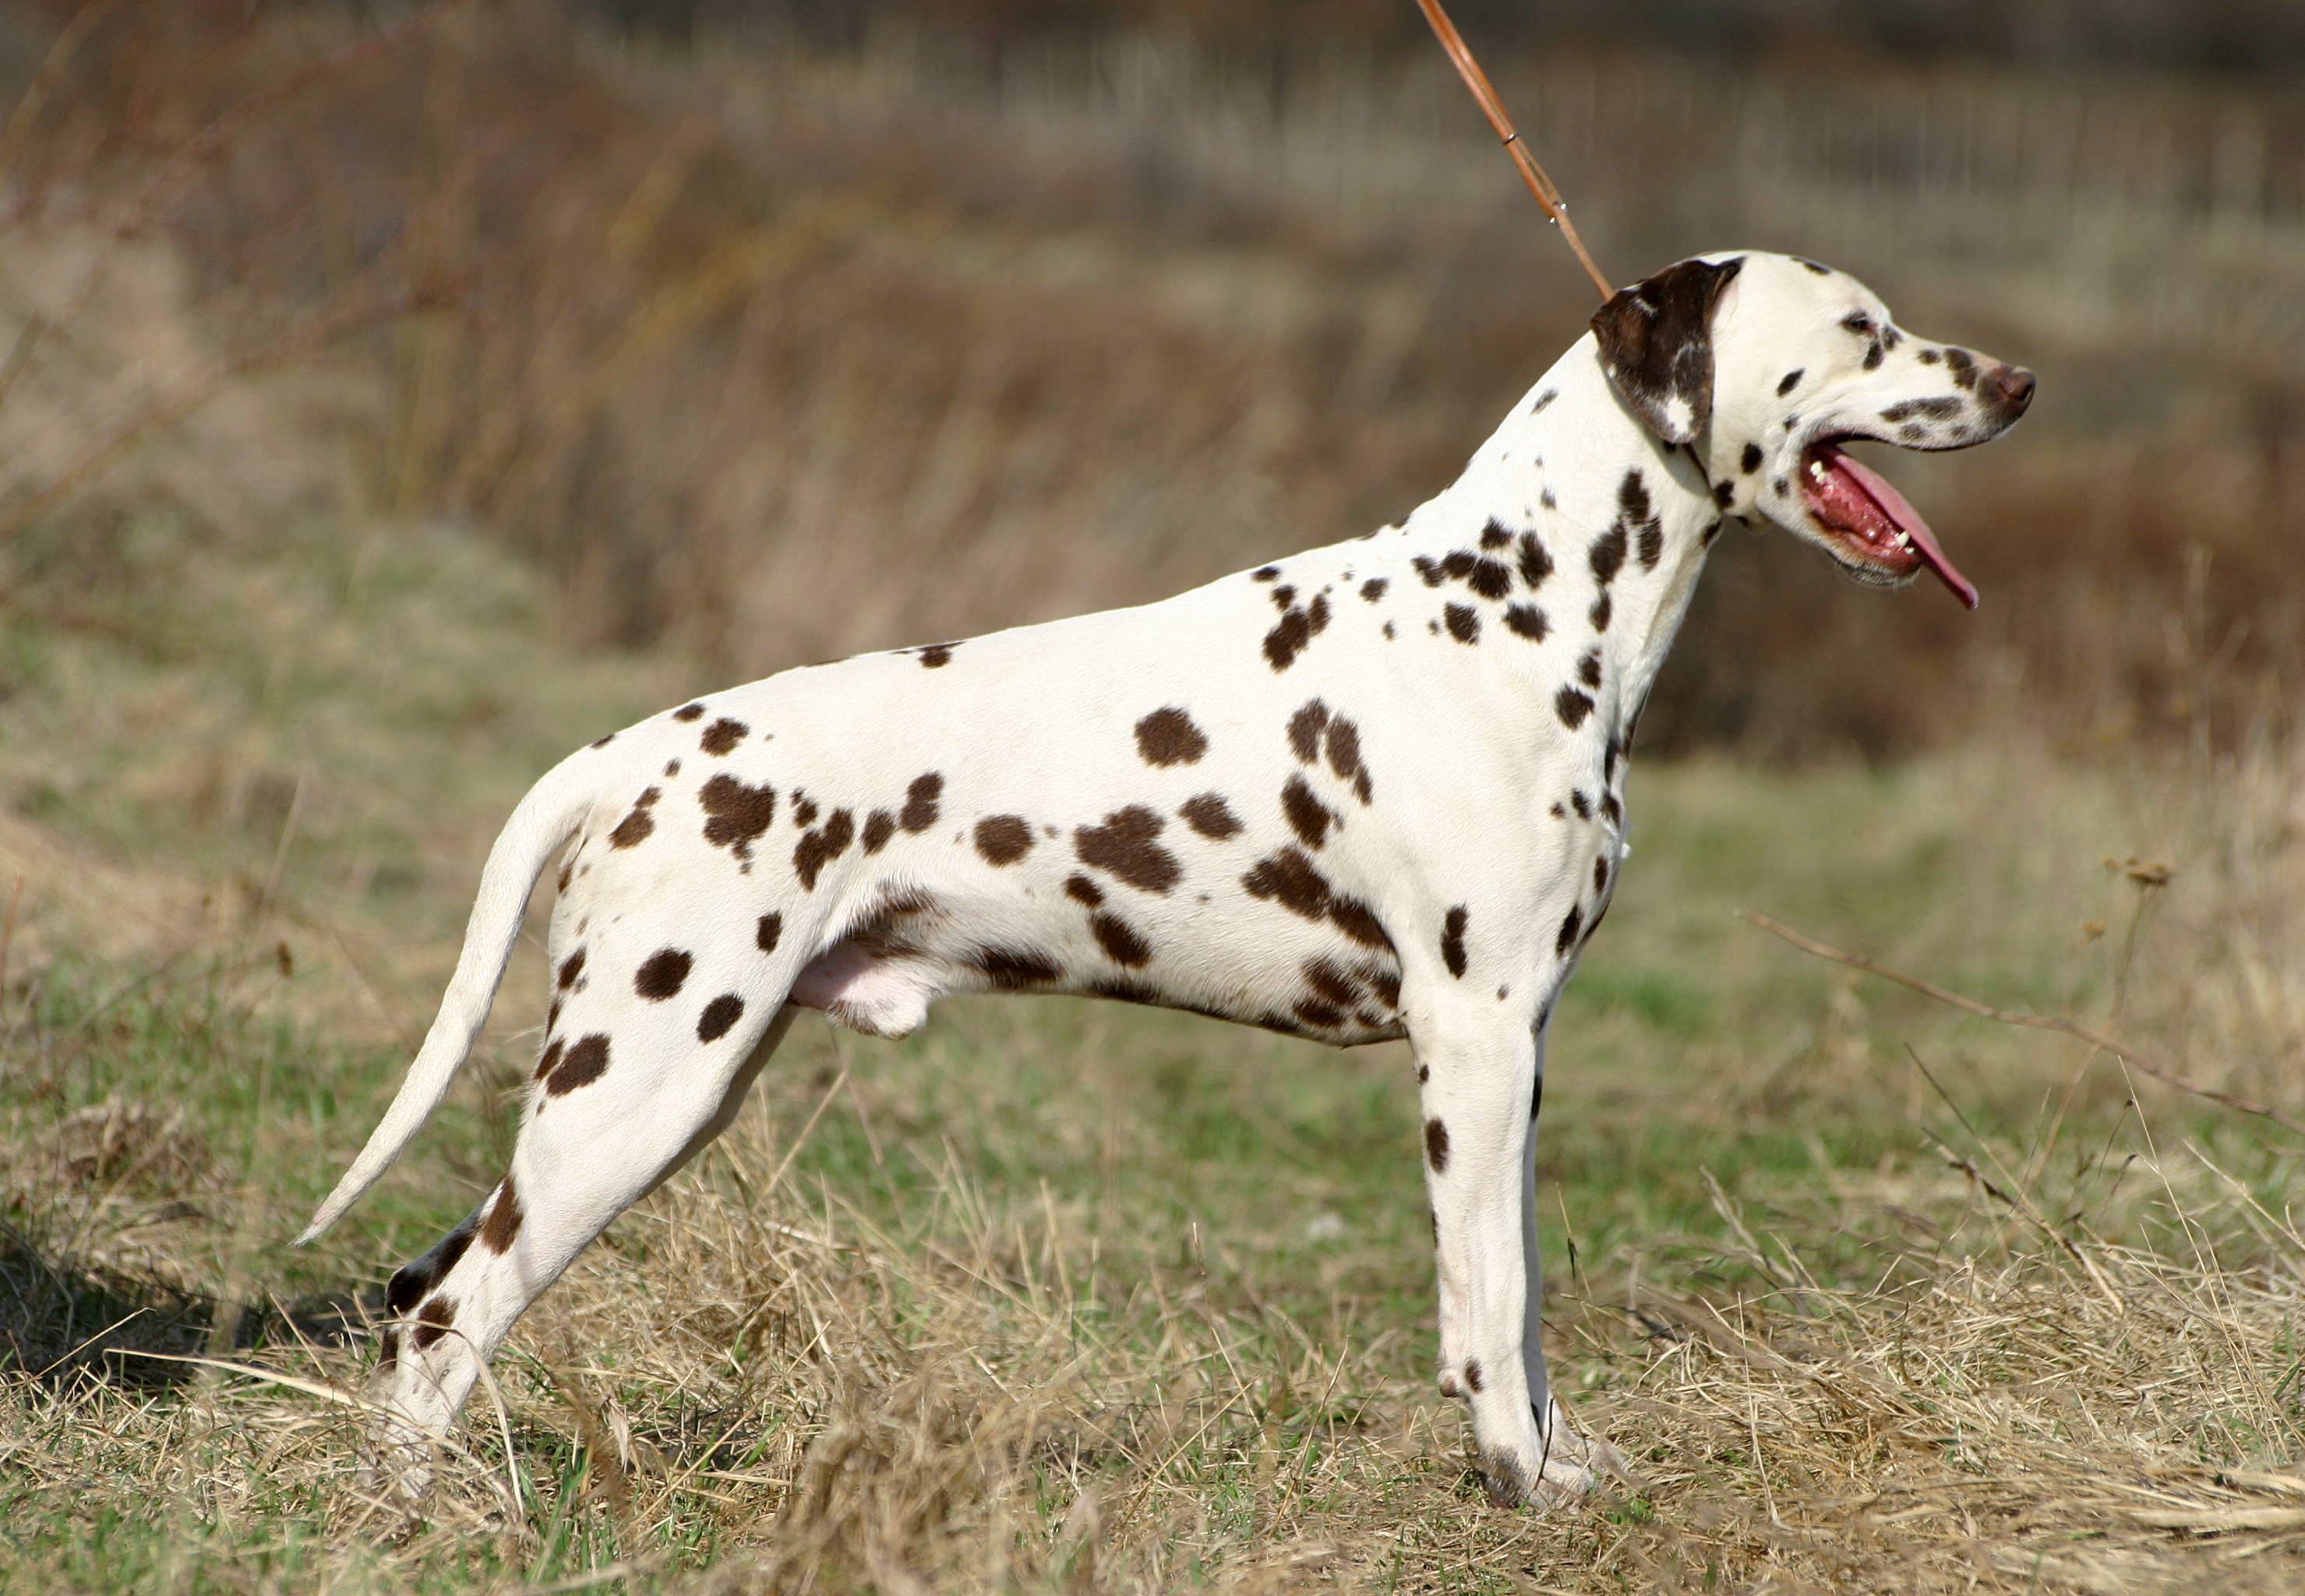 Dalmatian Photos And Wallpaper The Beautiful Pictures